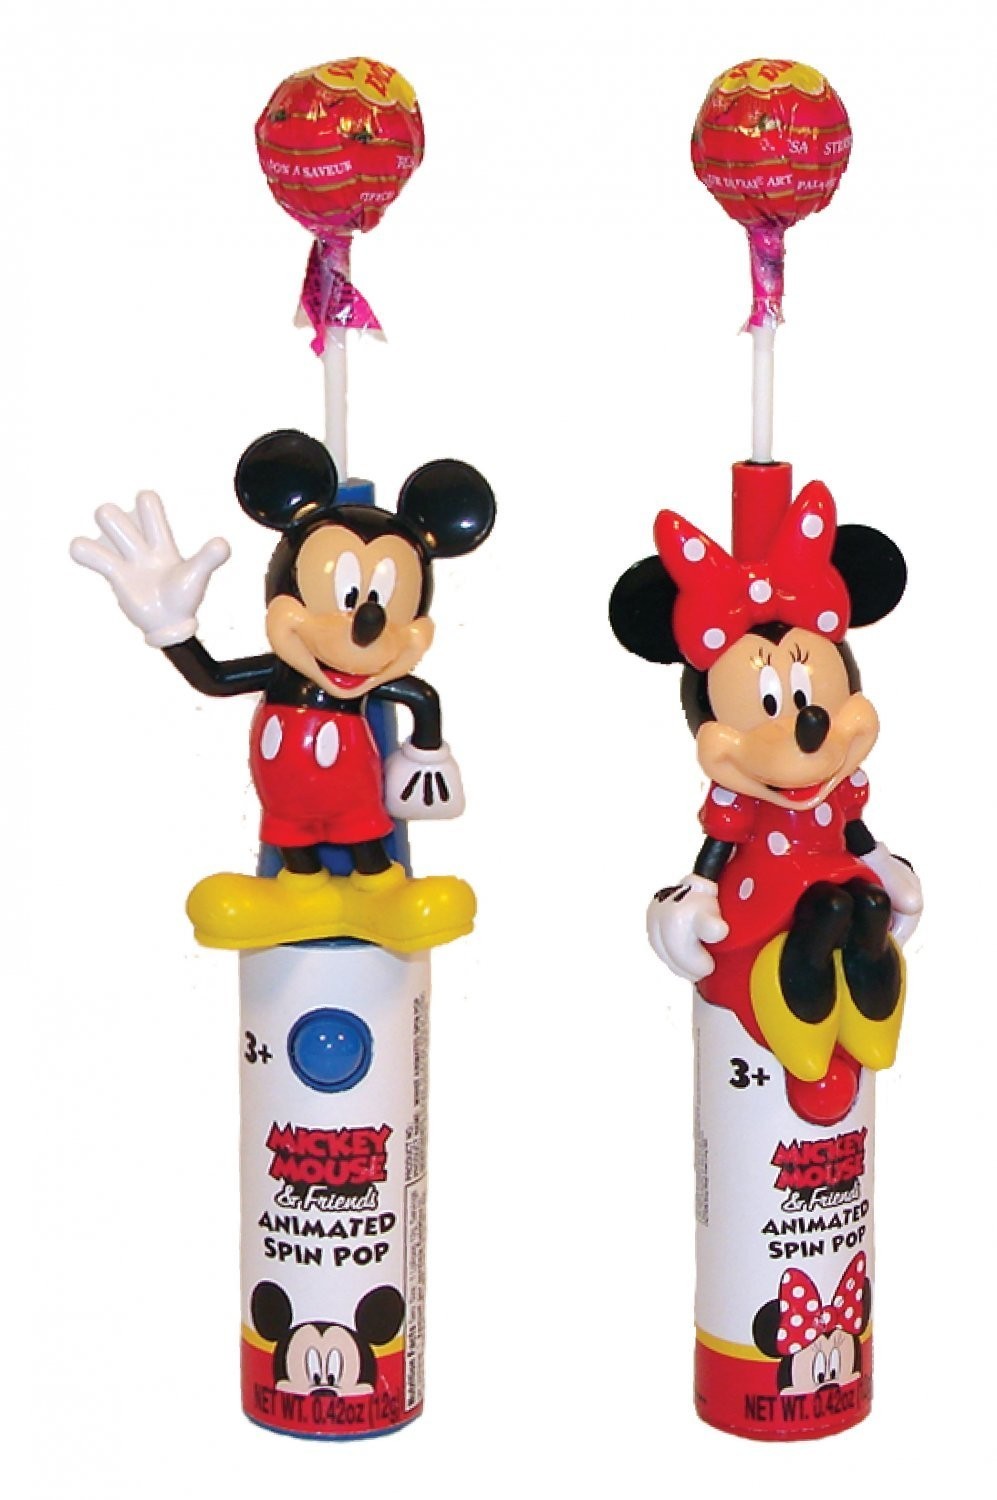 ©Disney Mickey & Friends Animated Spin Pop with candy